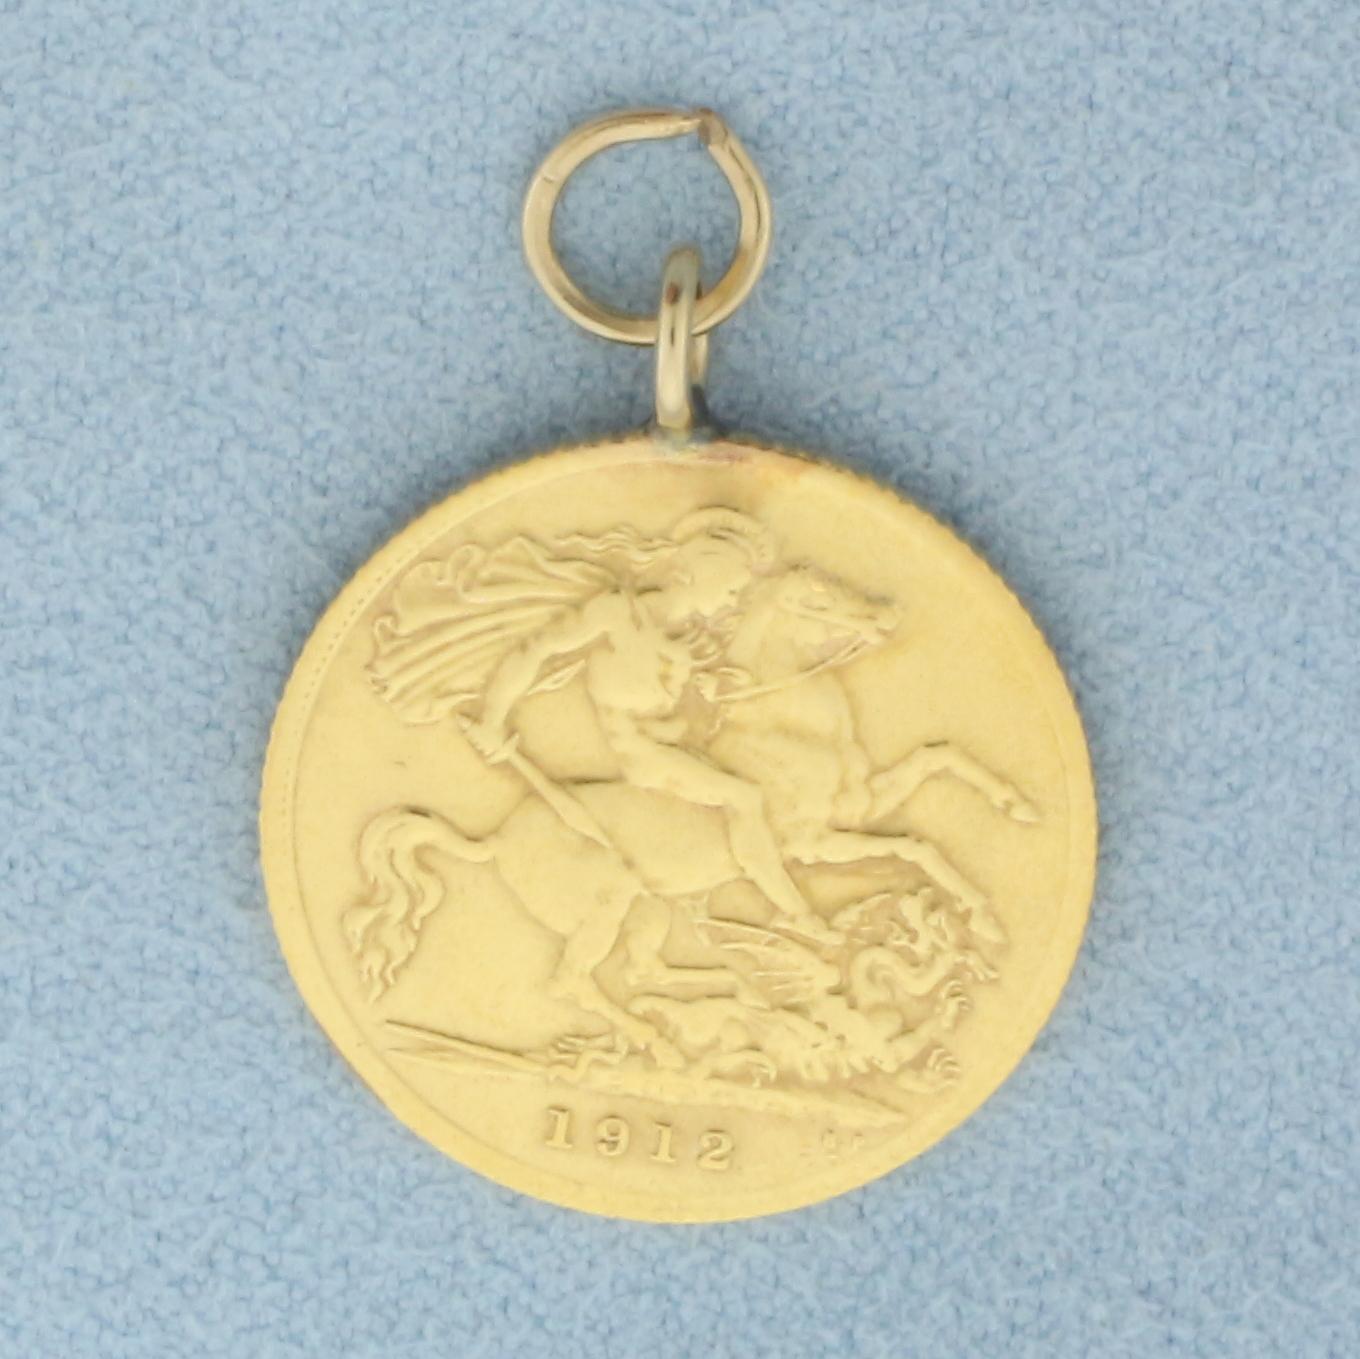 1912 British 1/2 Sovereign Gold Coin Pendant Or Charm